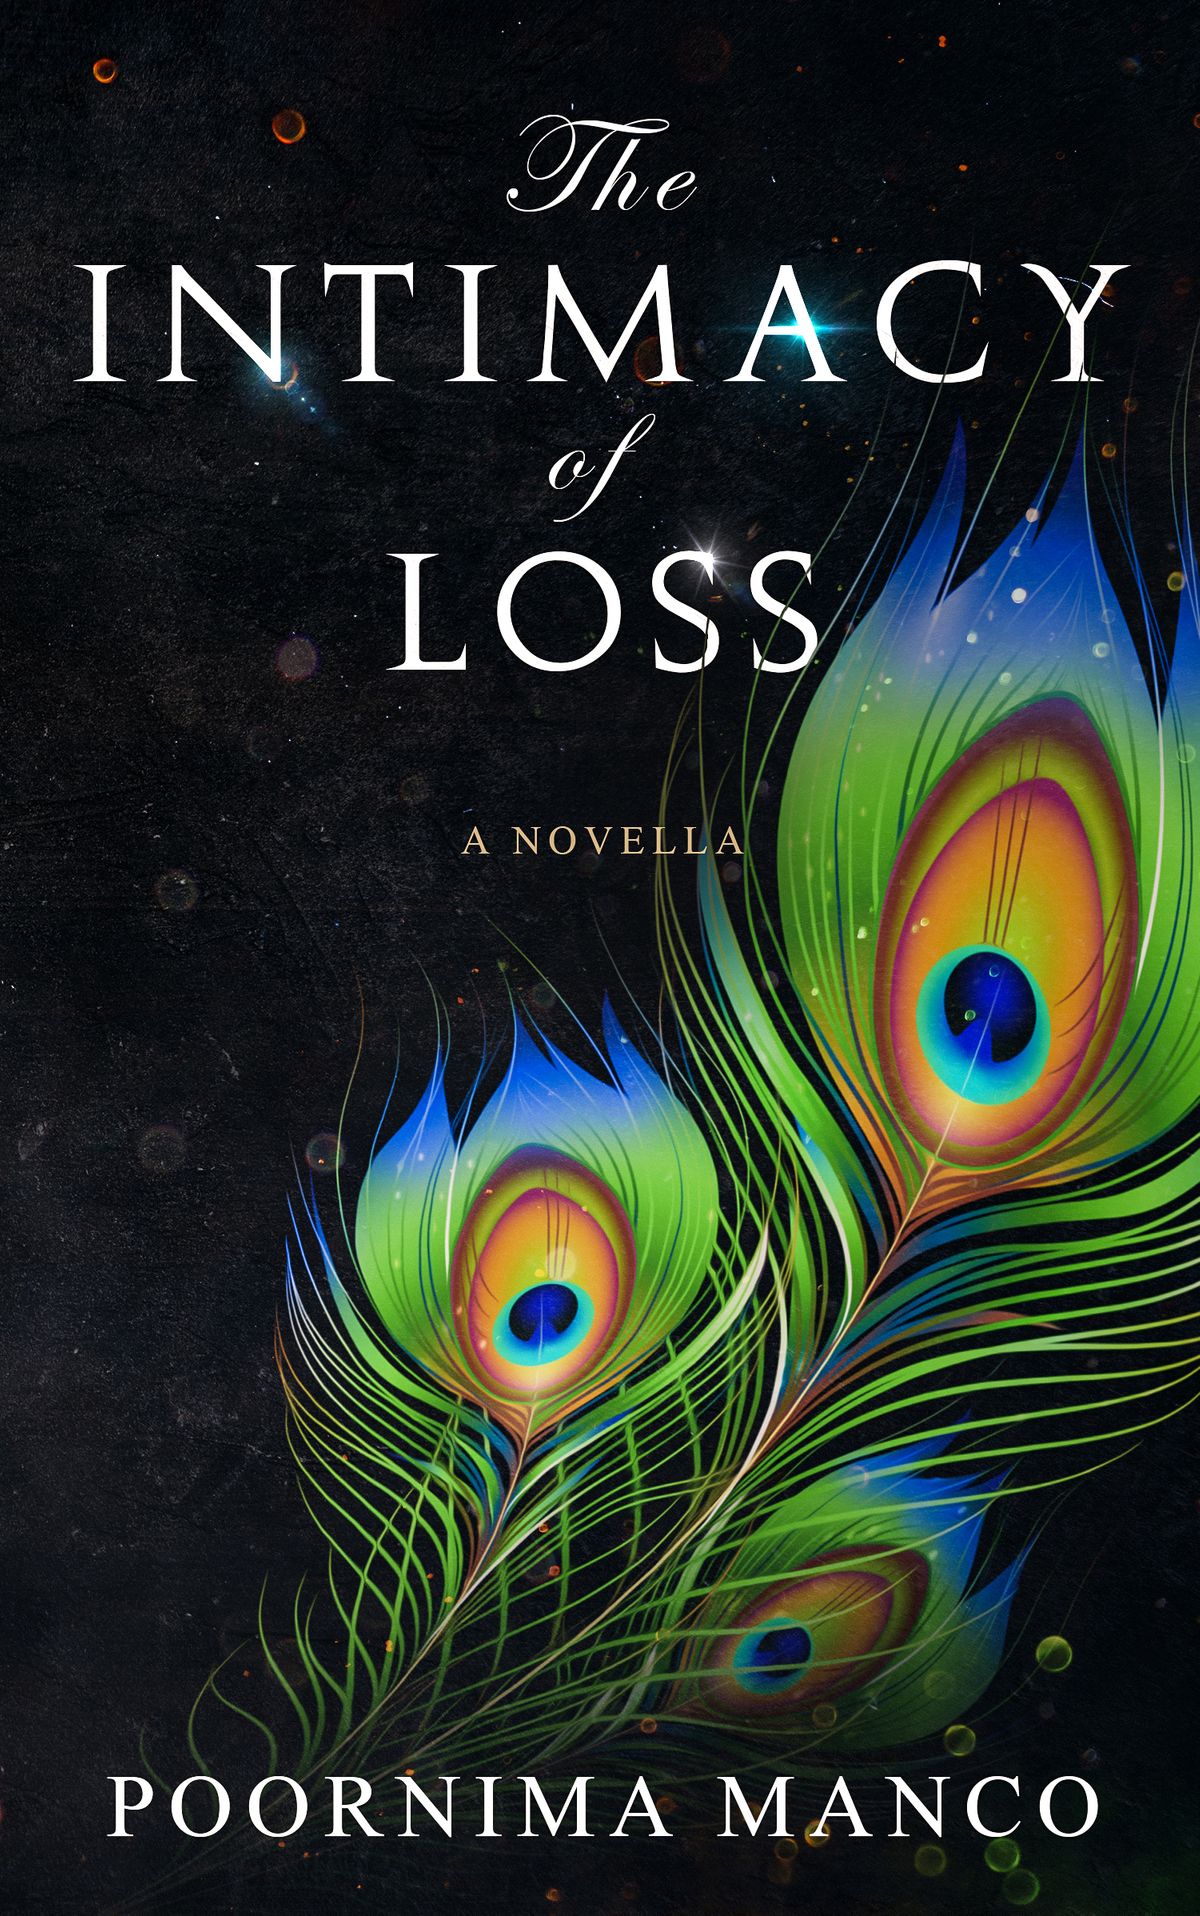 The Intimacy of Loss by Poornima Manco ePub Download